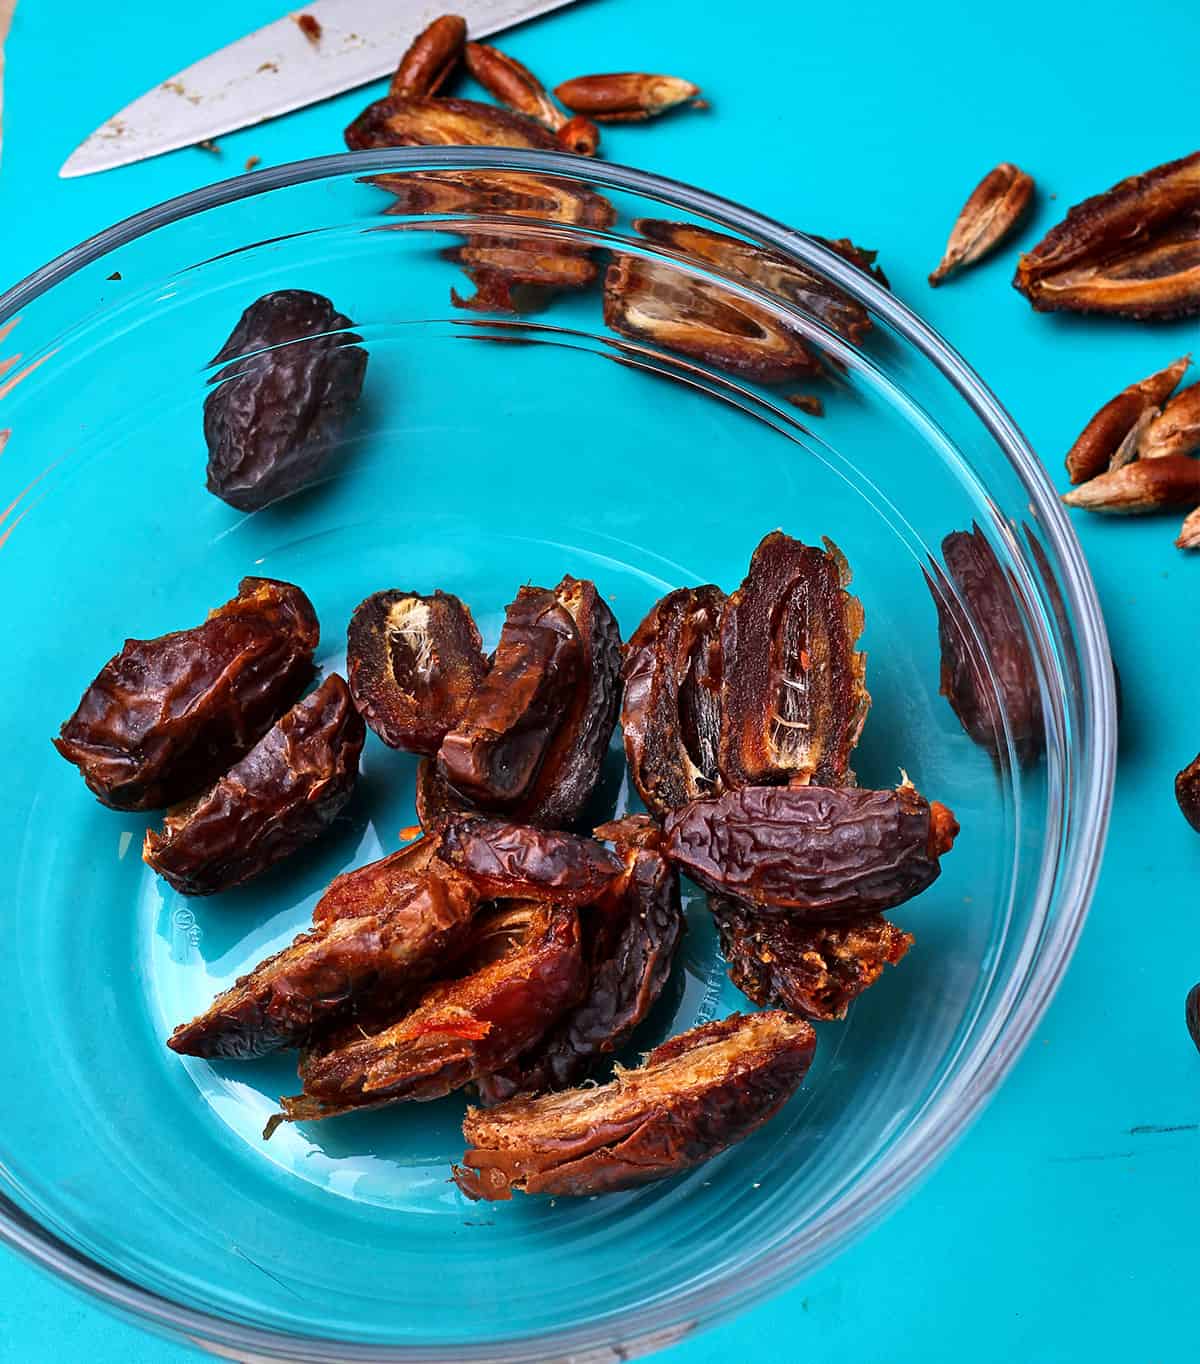 Pitted dates are placed in a glass bowl.